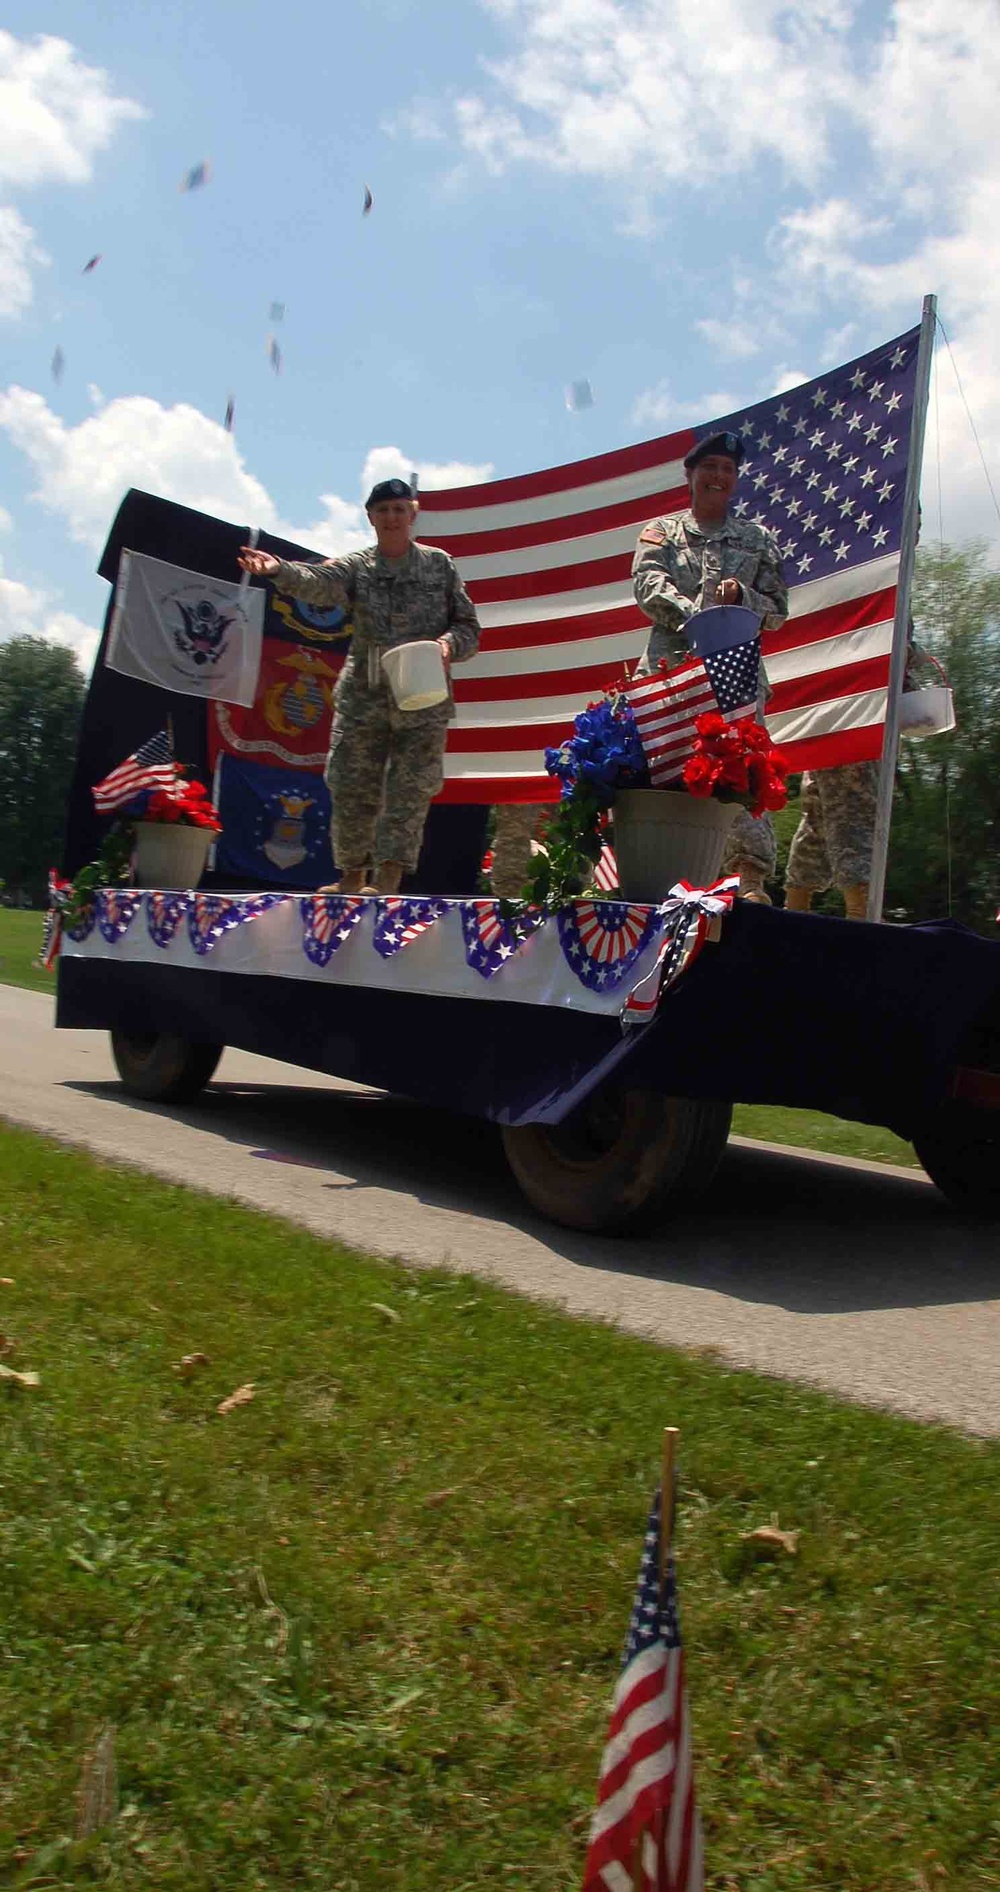 Camp Atterbury Soldiers participating in the Morgantown parade May 23